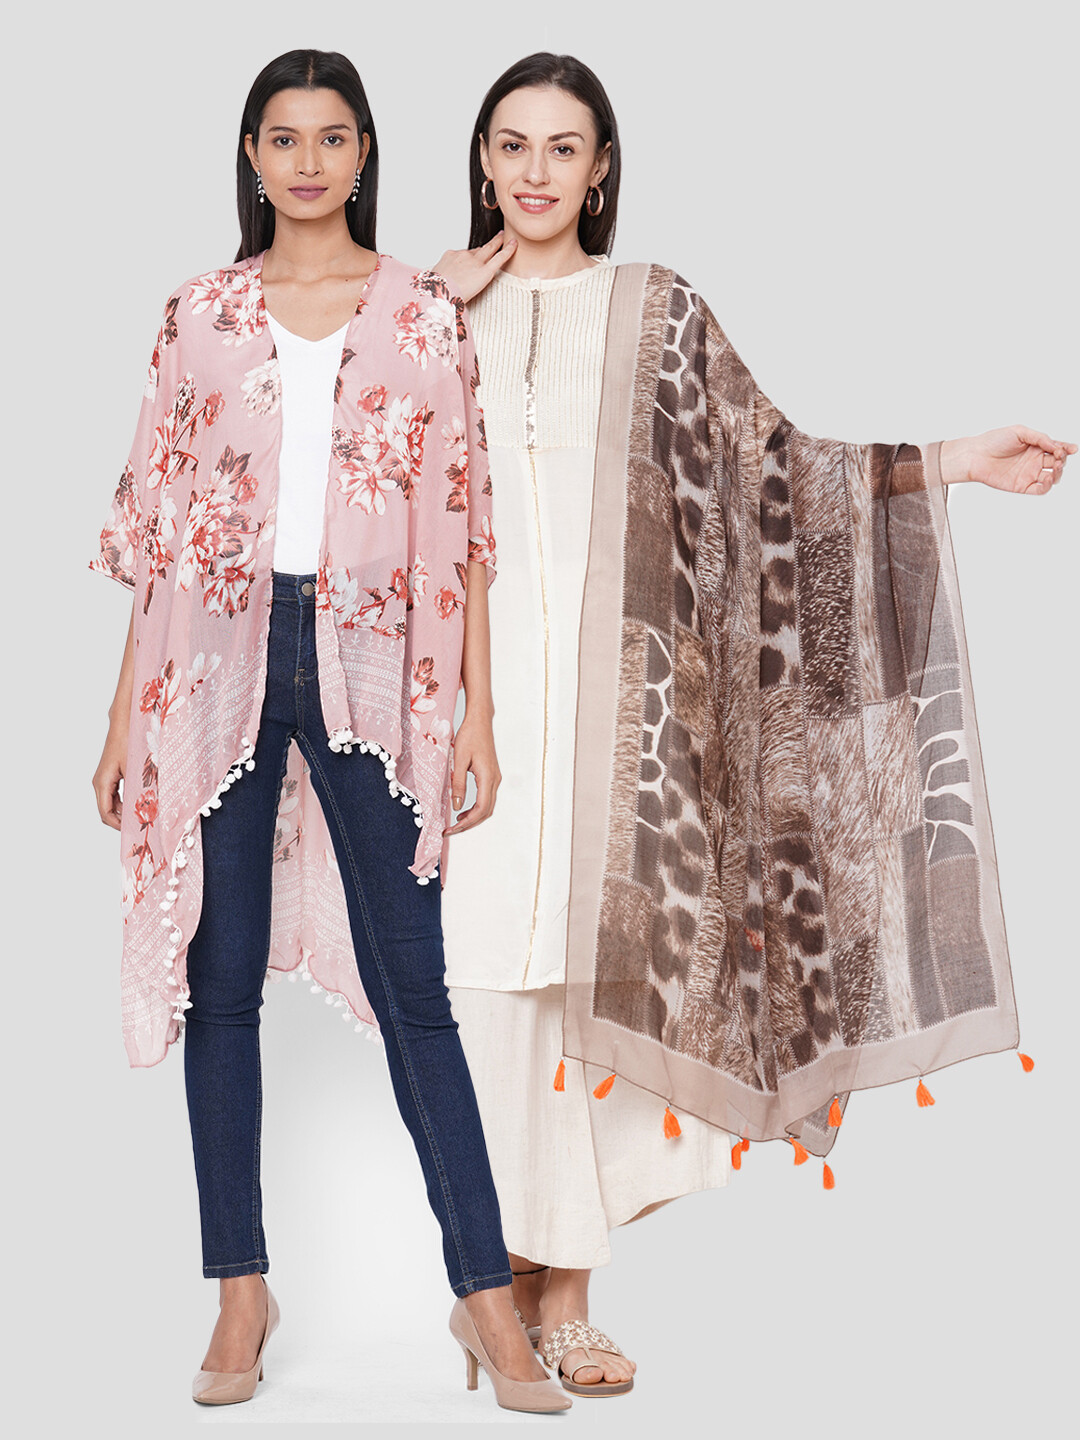 Stylist Printed Ponchos & Printed Scarf with Tassels - Combo offer